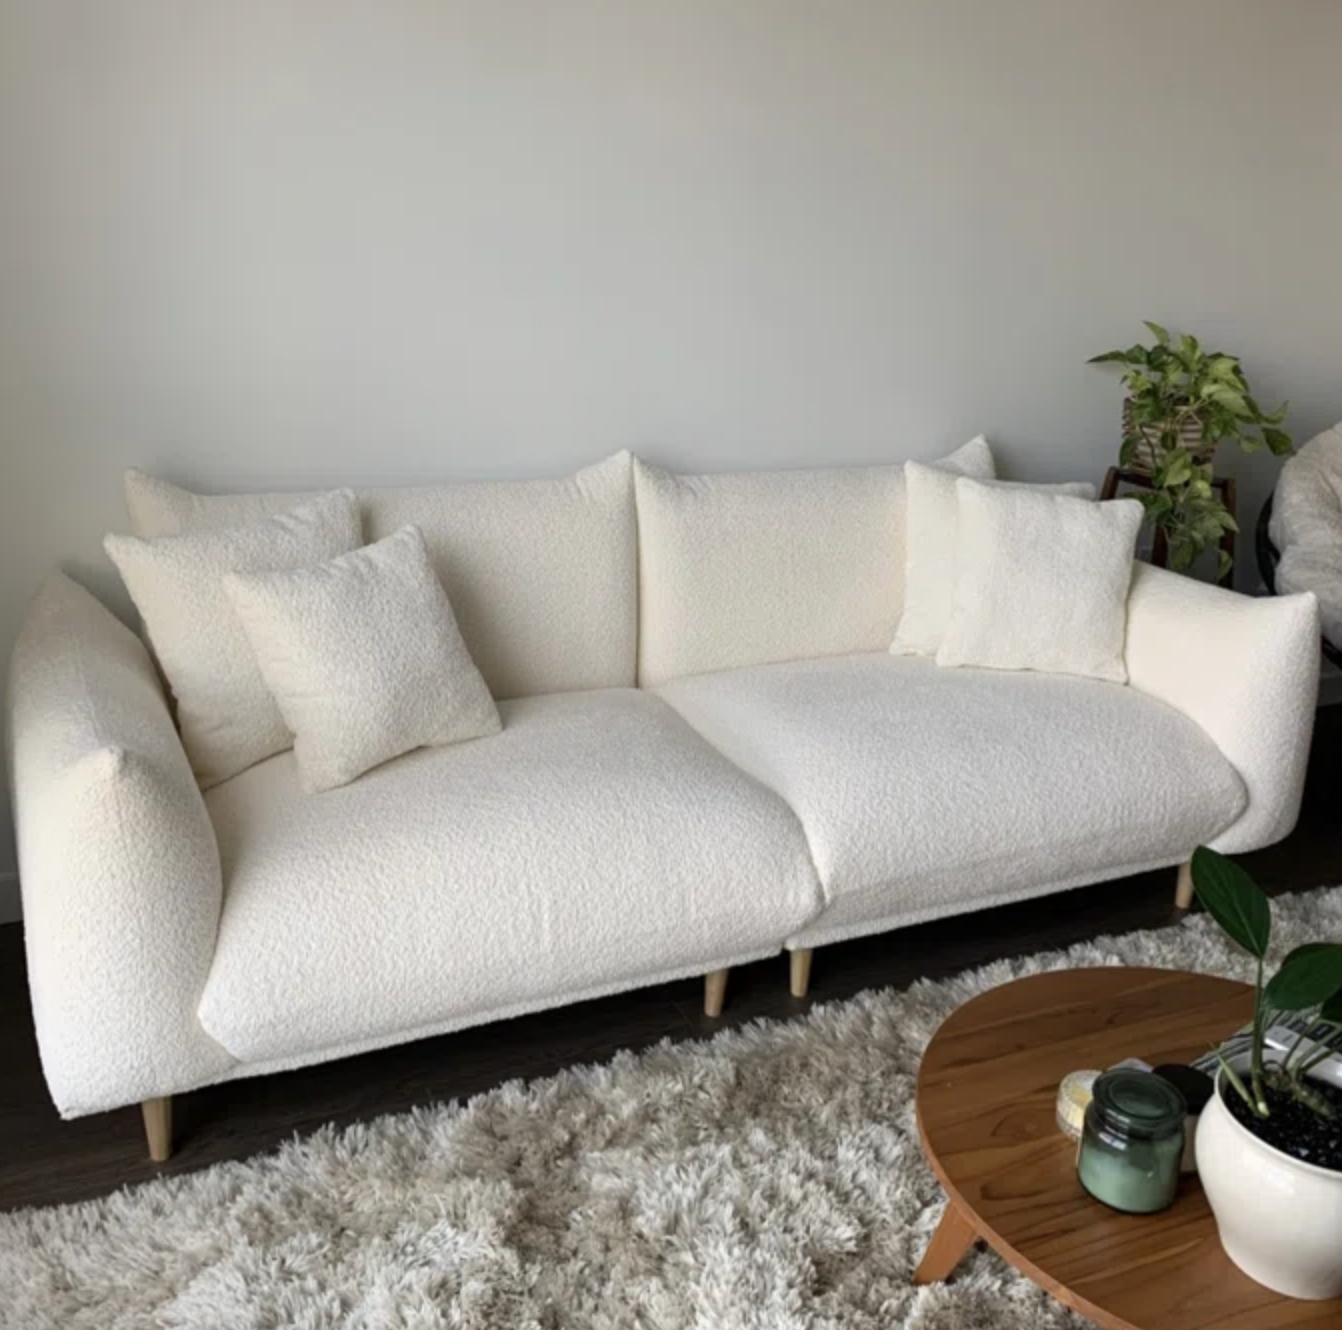 A white couch